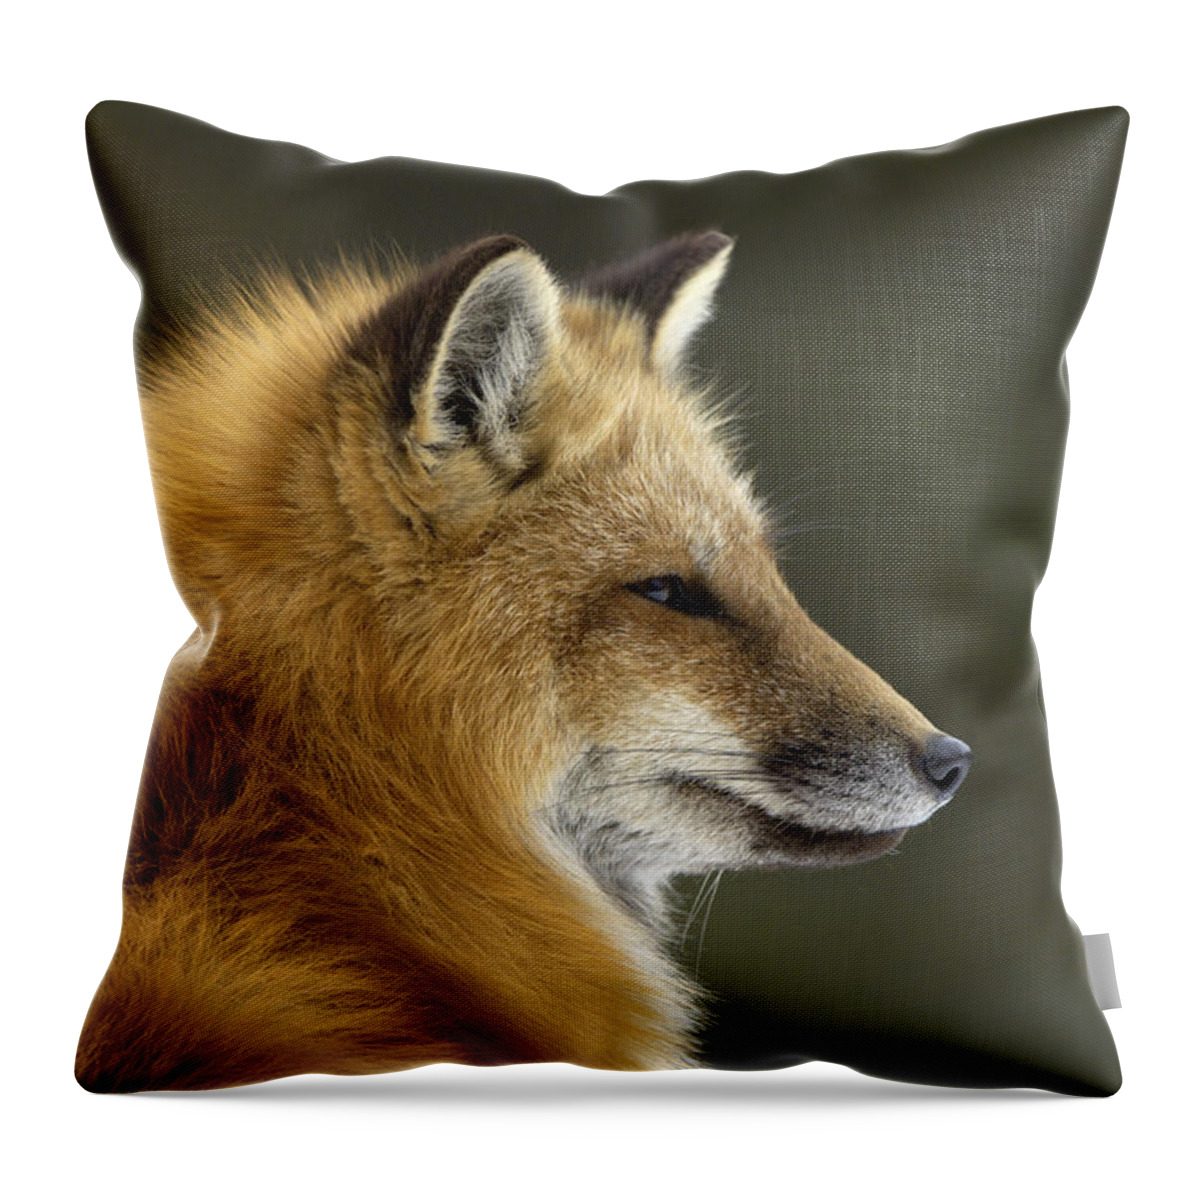 Flpa Throw Pillow featuring the photograph Sly Red Fox by Malcolm Schuyl